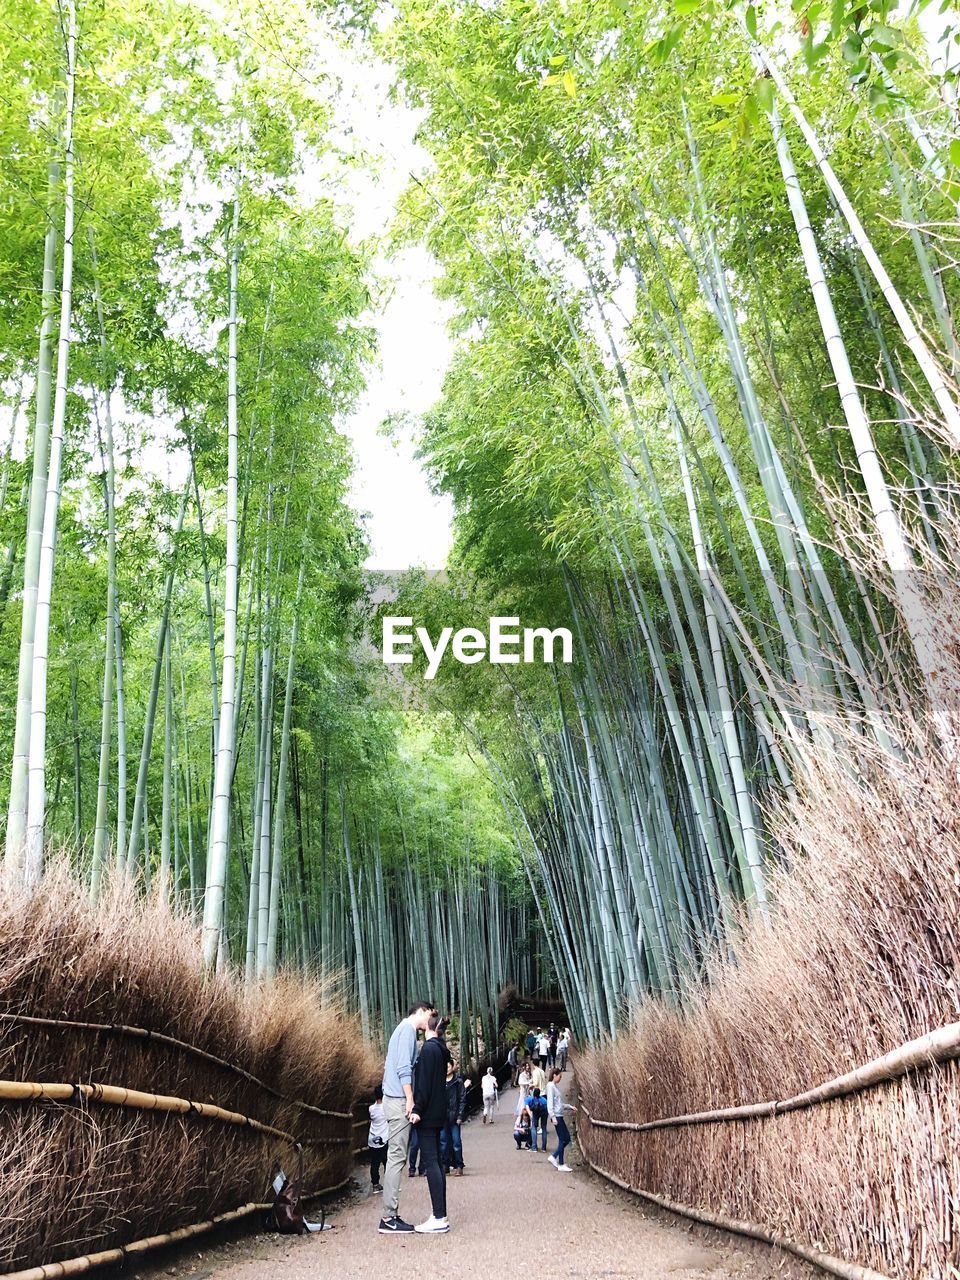 Couple kissing while standing on footpath amidst bamboo grooves